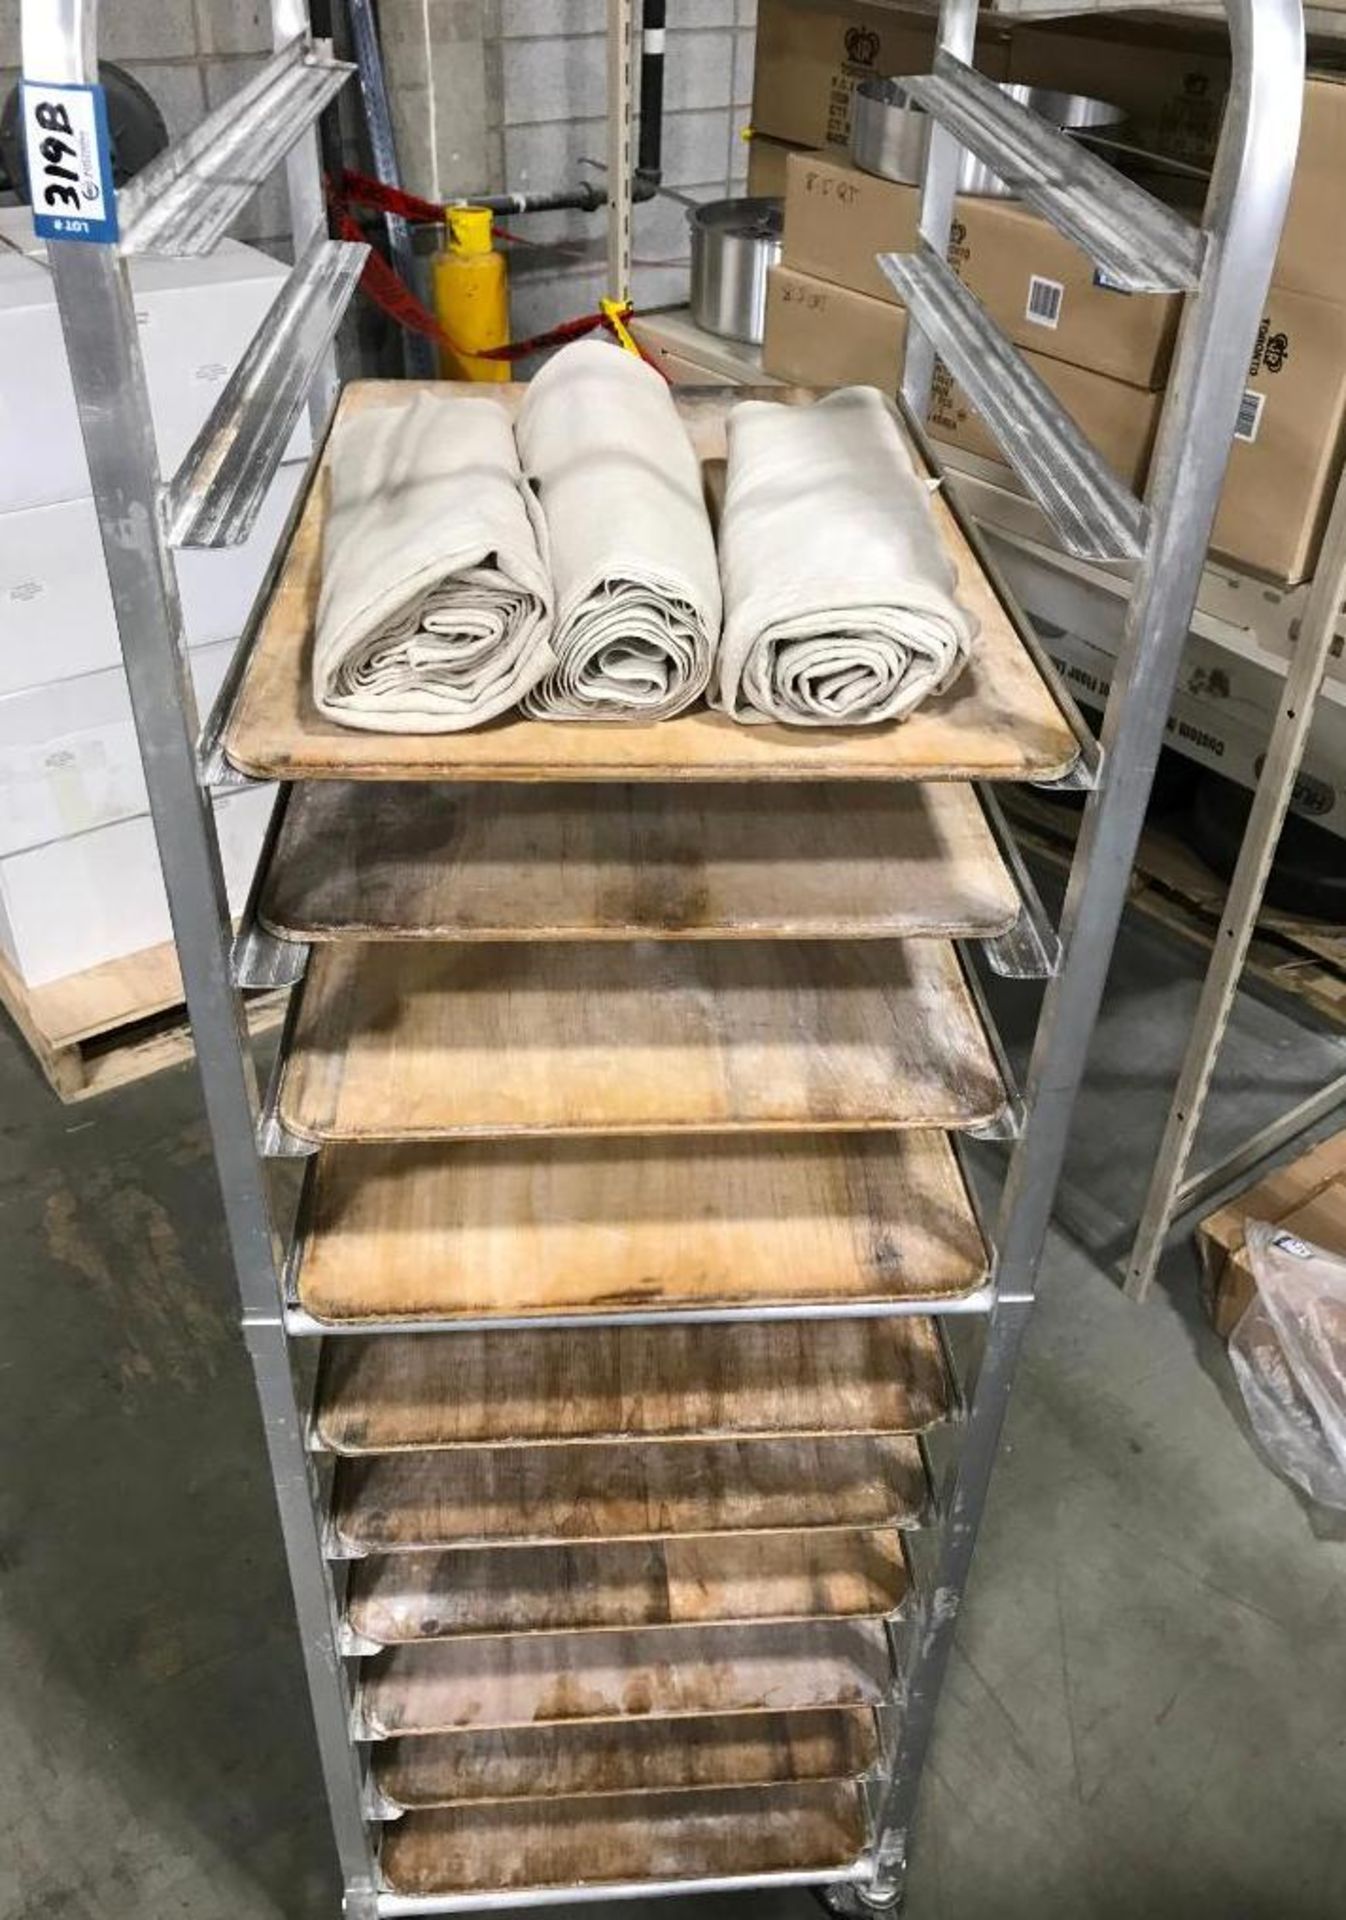 12 TIER MOBILE PAN RACK WITH 10 WOODEN PROOFING BOARDS & 3 BAKERS COUCHE - Image 2 of 5